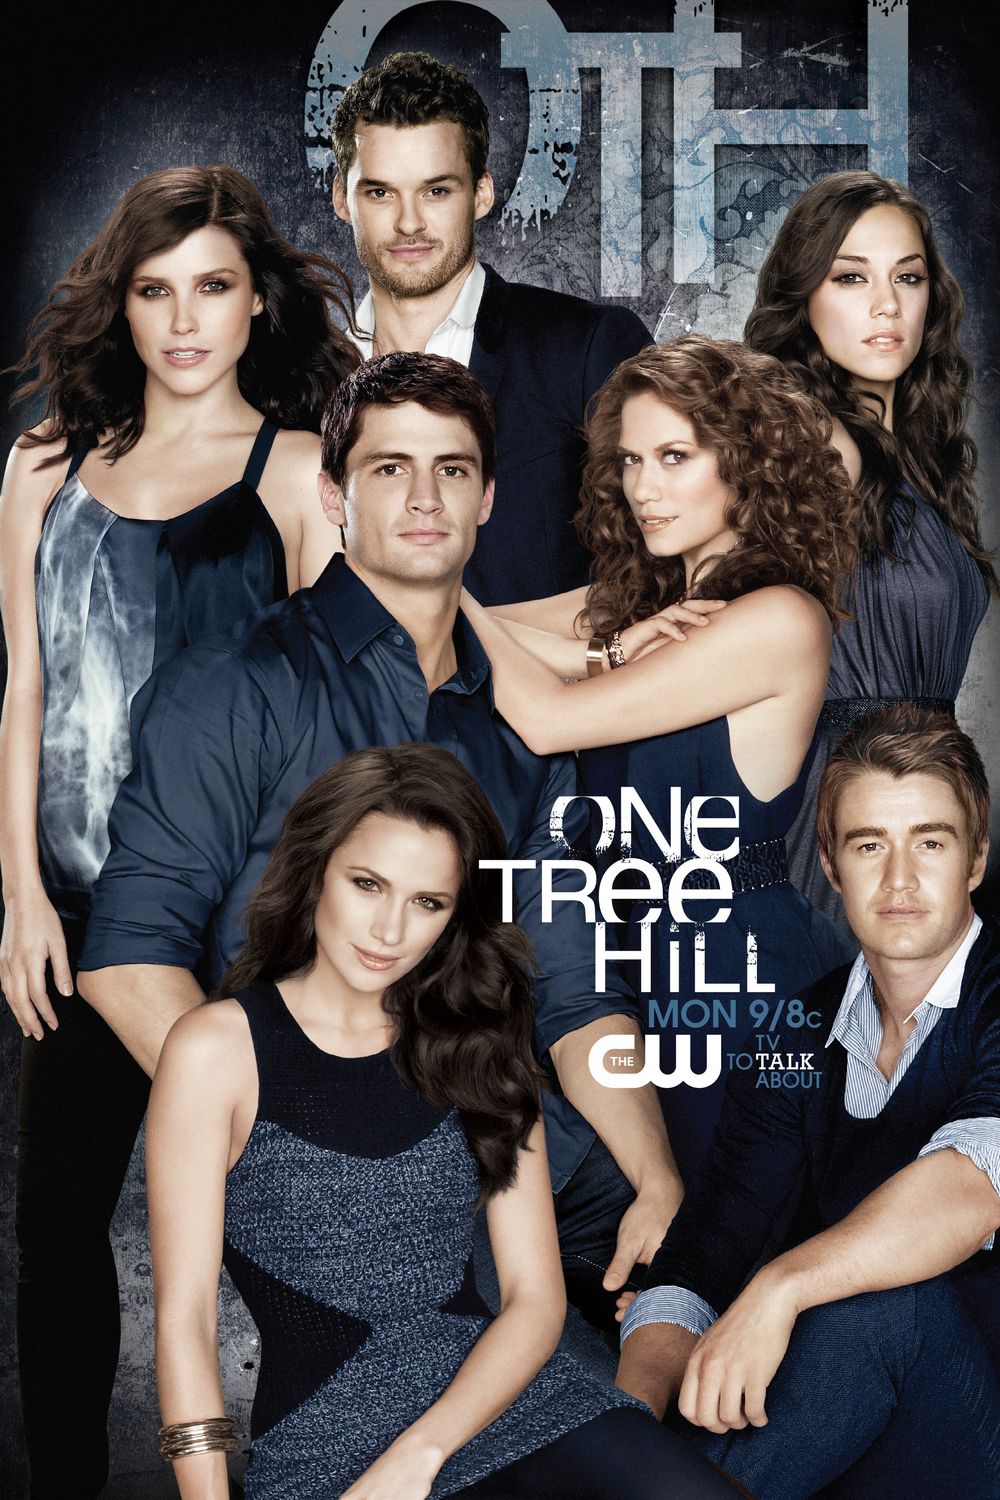 One tree Hill Poster.jpg